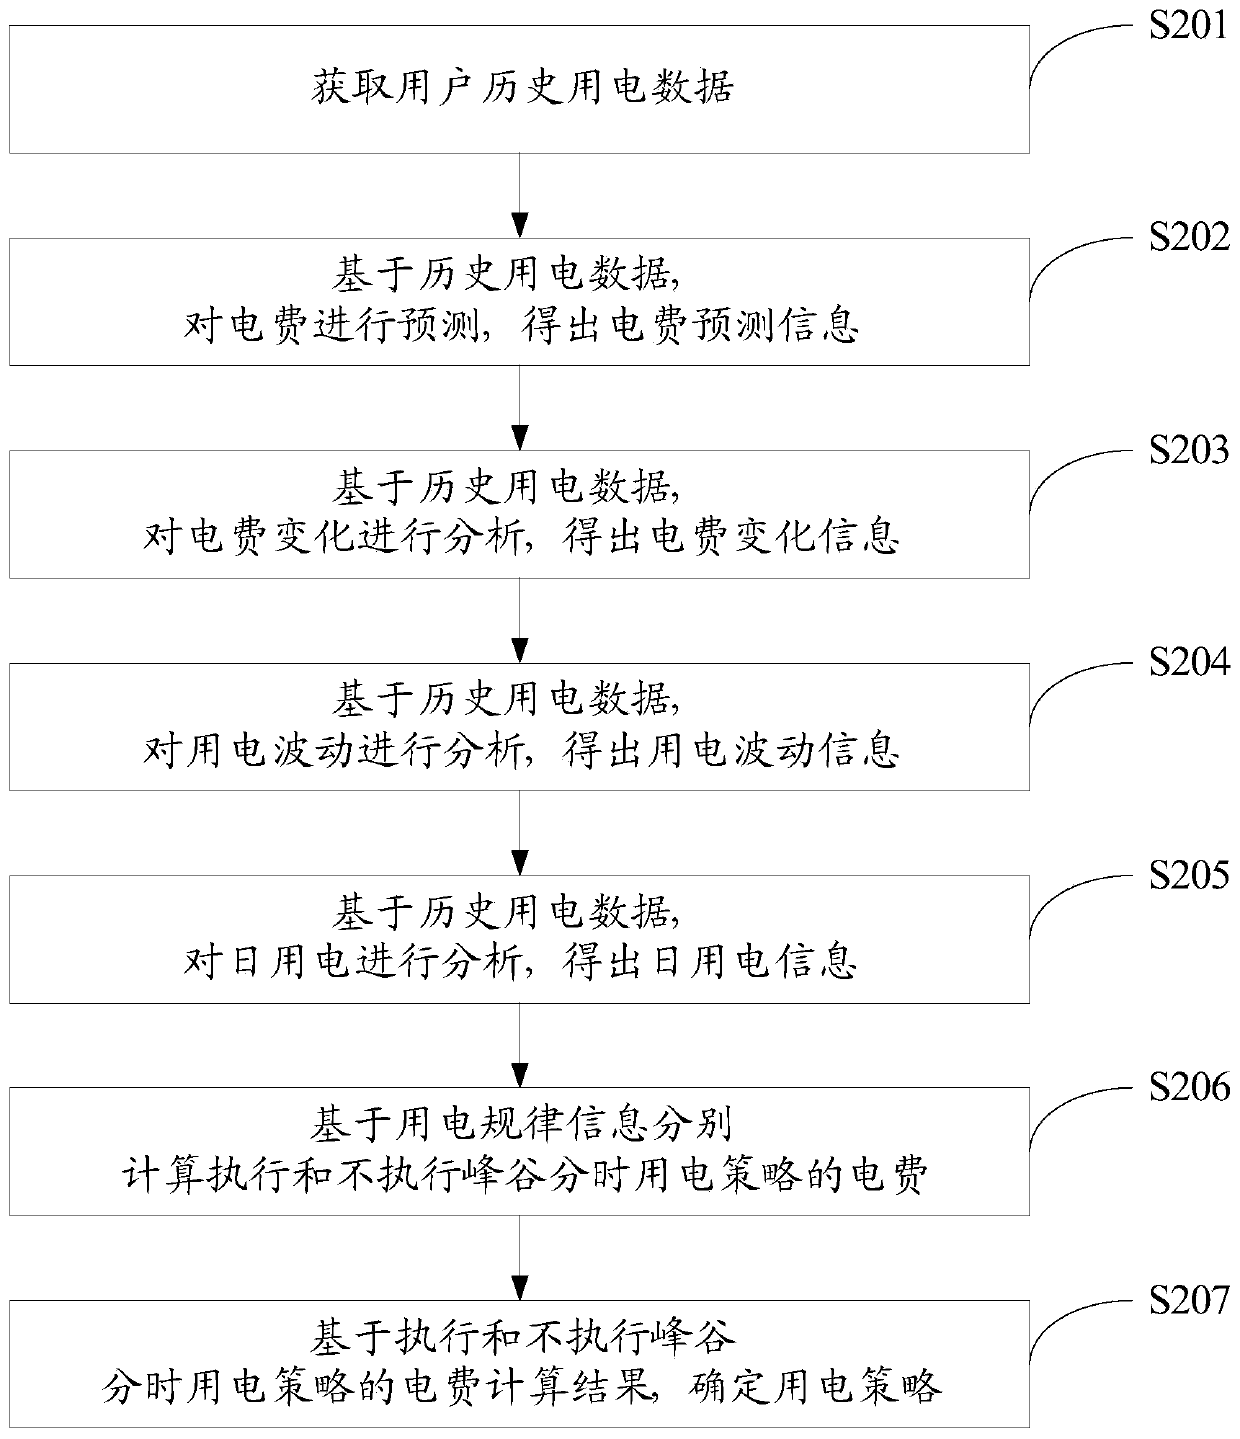 Intelligent power utilization analysis method and system based on cloud computing